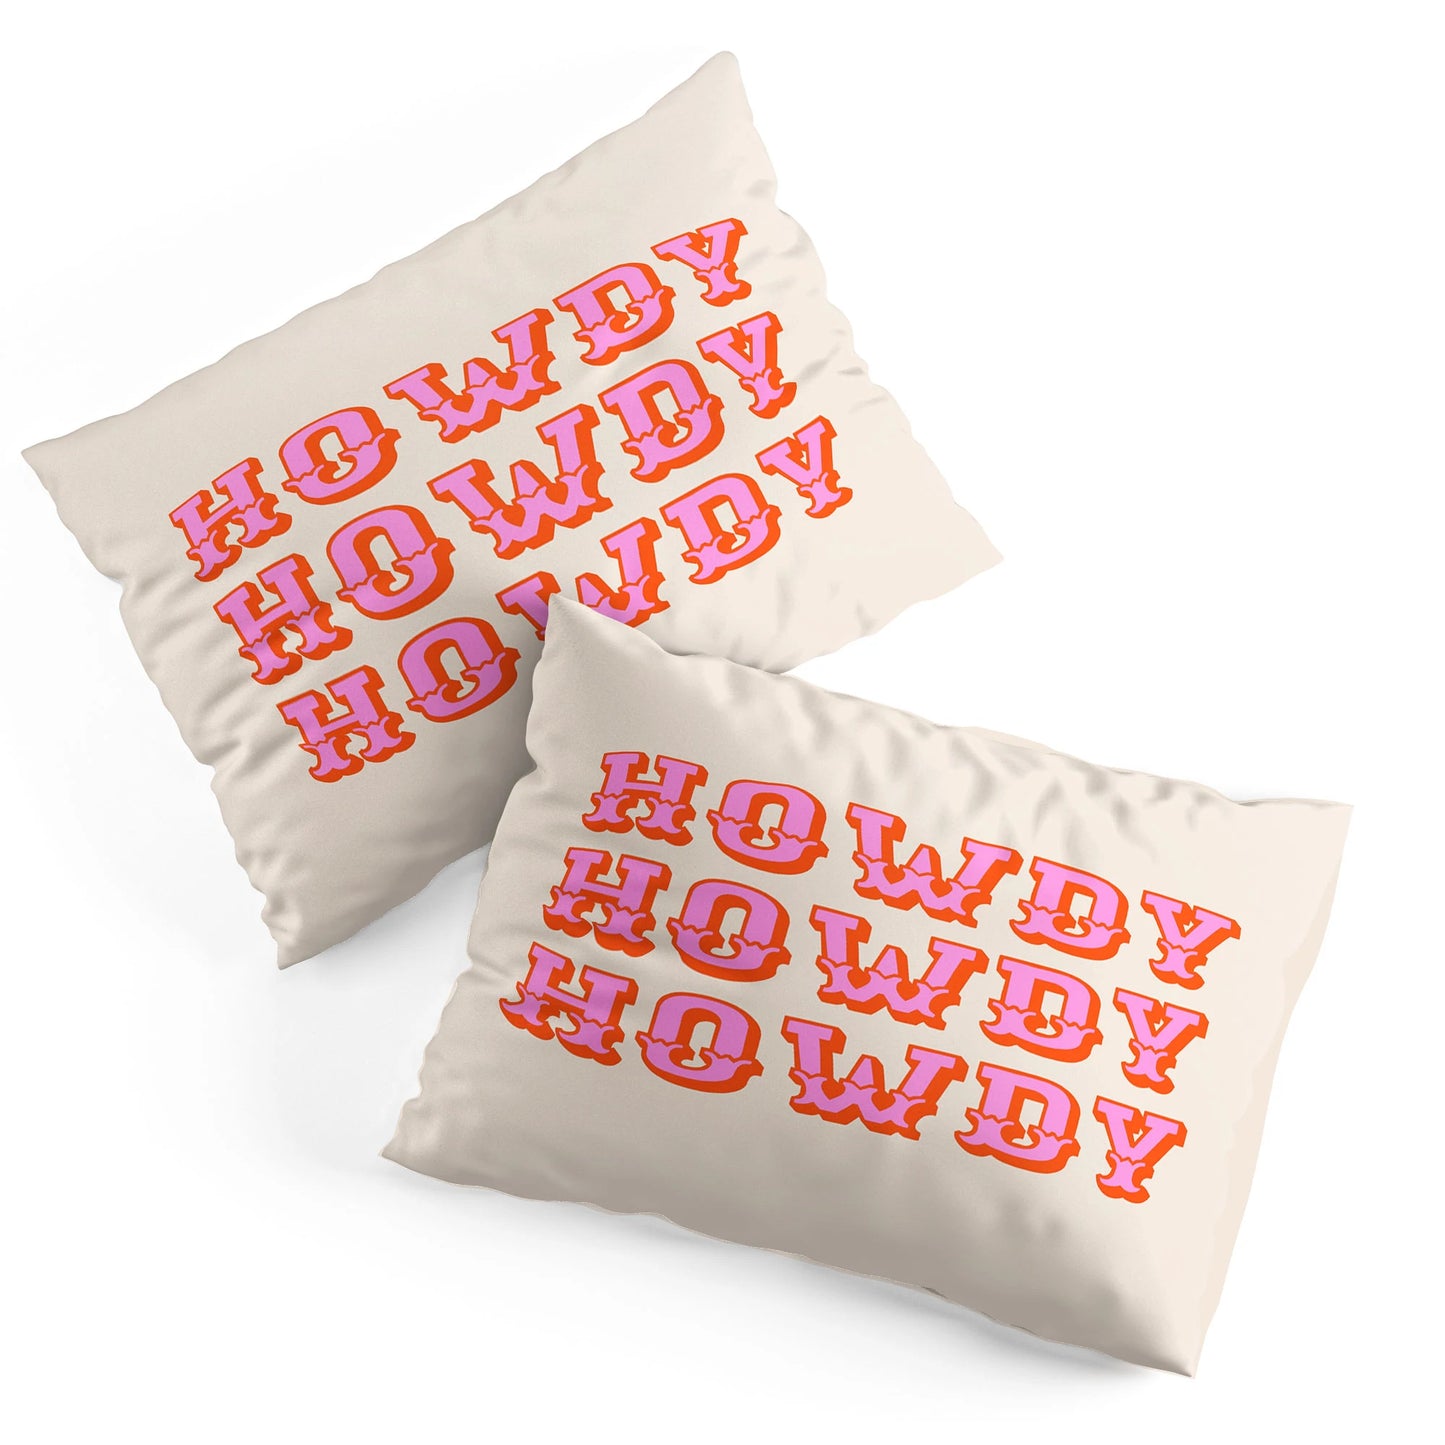 HOWDY Pillow Shams - bedding, blanket, case, cases, cowgirl, cowgirl style, cowgirlstyle, decor, farm, home, howdy, pillow, pillow case, pillow sham, pillow shams, pillows, pillowsham, ranch, ranchhome, southwestern, western, western bedding, western pillow, westernbedding - howdy - Baha Ranch Western Wear